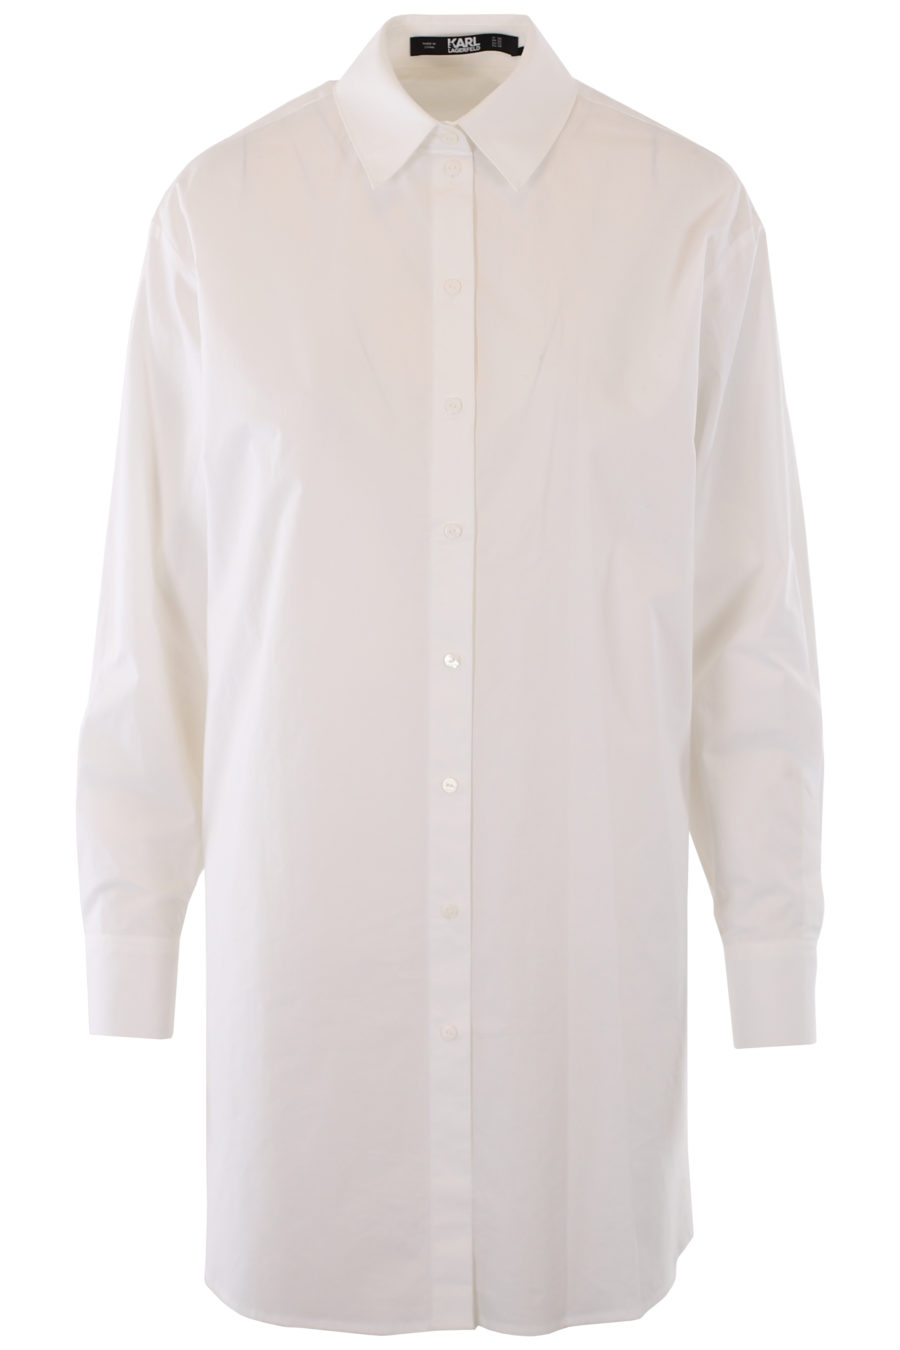 Long white shirt with logo and embroidered details - IMG 1242